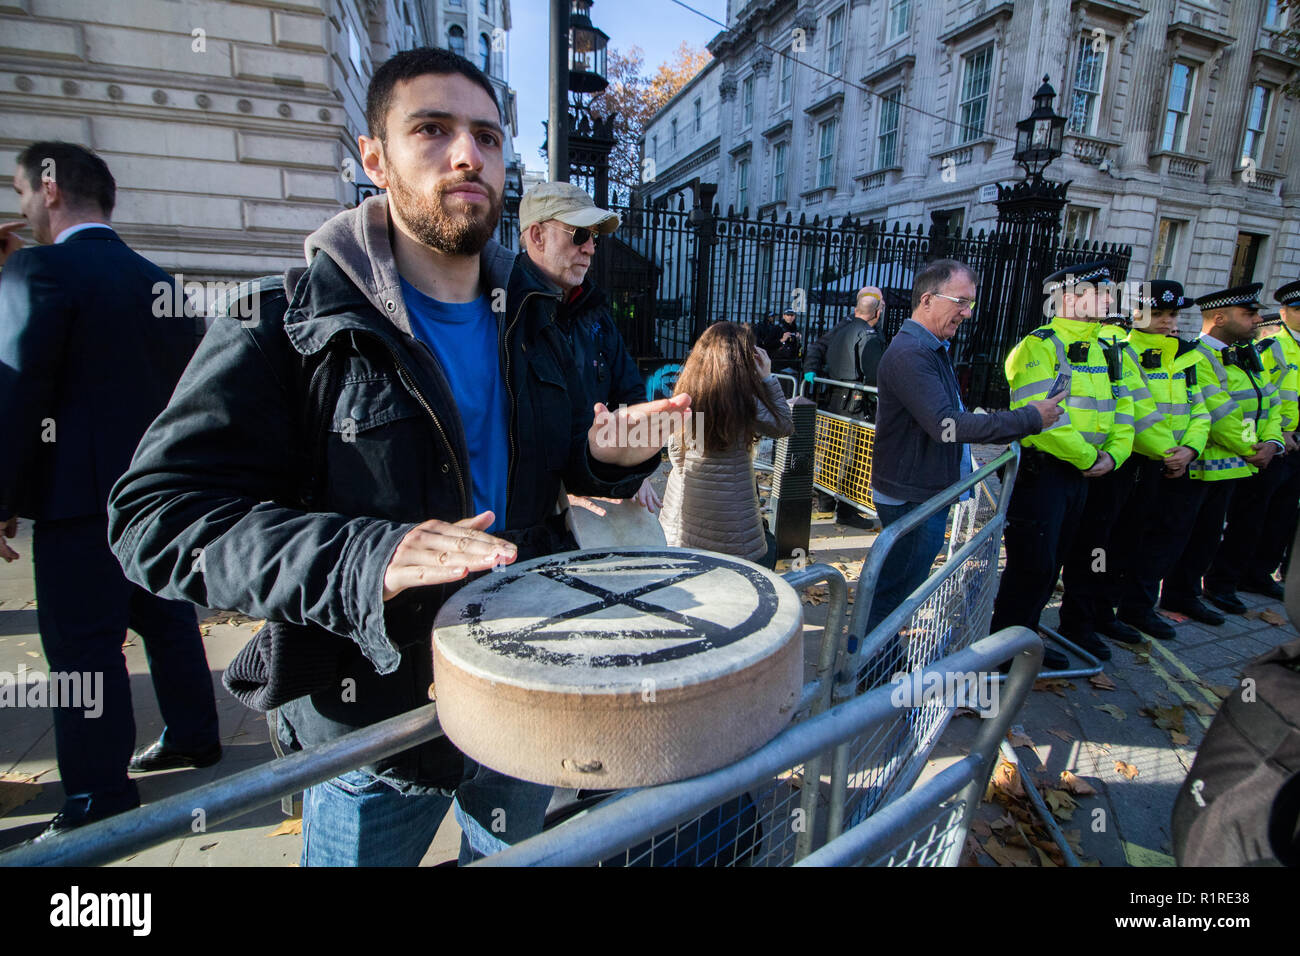 London UK. 14th November 2018. Police form barriers as Extinction Rebellion climate activists protest outside Downing Street Credit: amer ghazzal/Alamy Live News Stock Photo